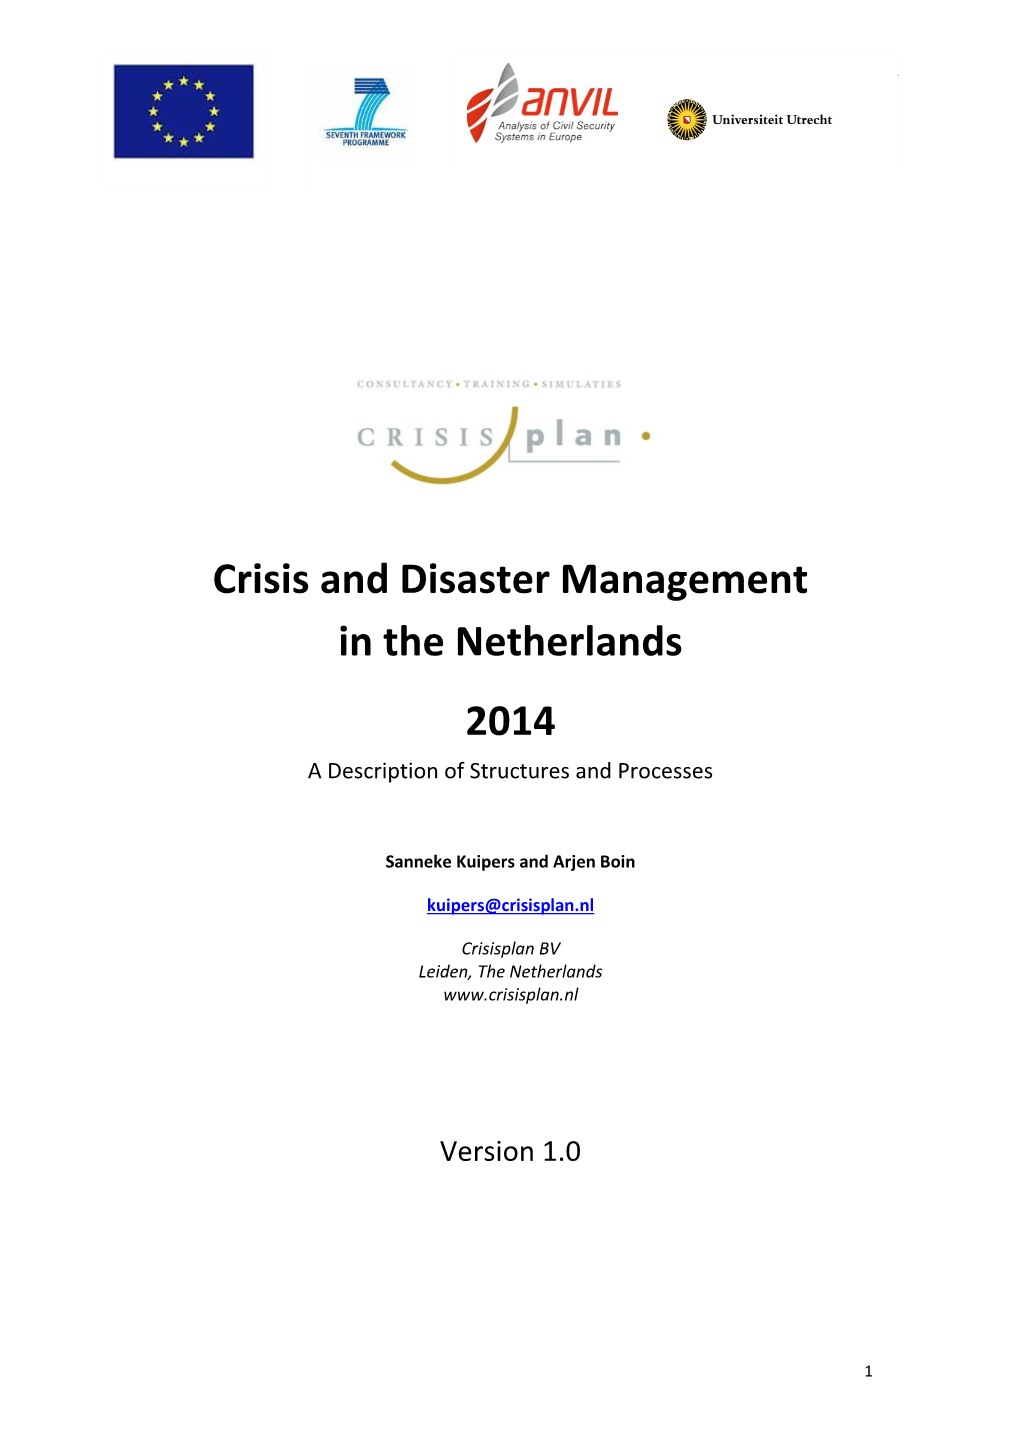 Crisis and Disaster Management in the Netherlands – 2014